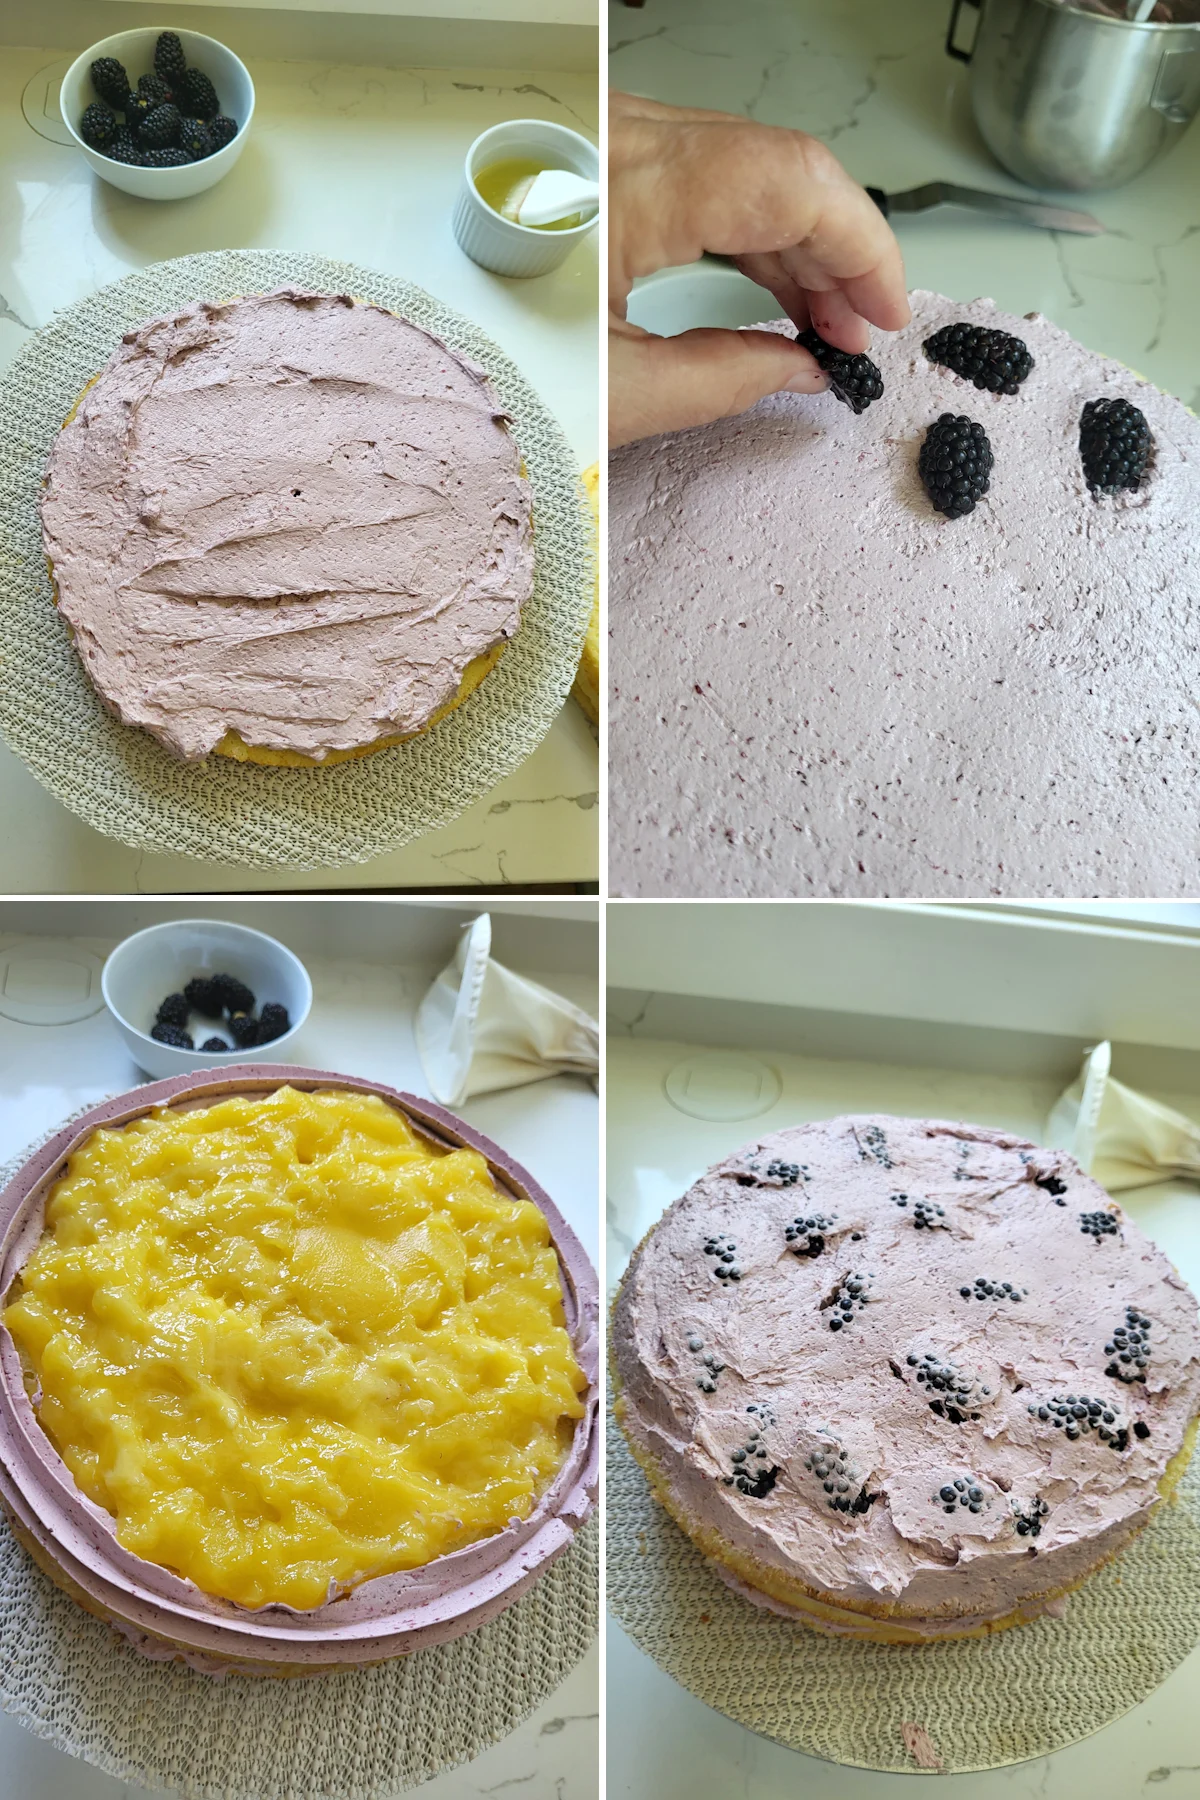 A cake with blackberry buttercream on the layer and a cake with lemon curd on the layer.